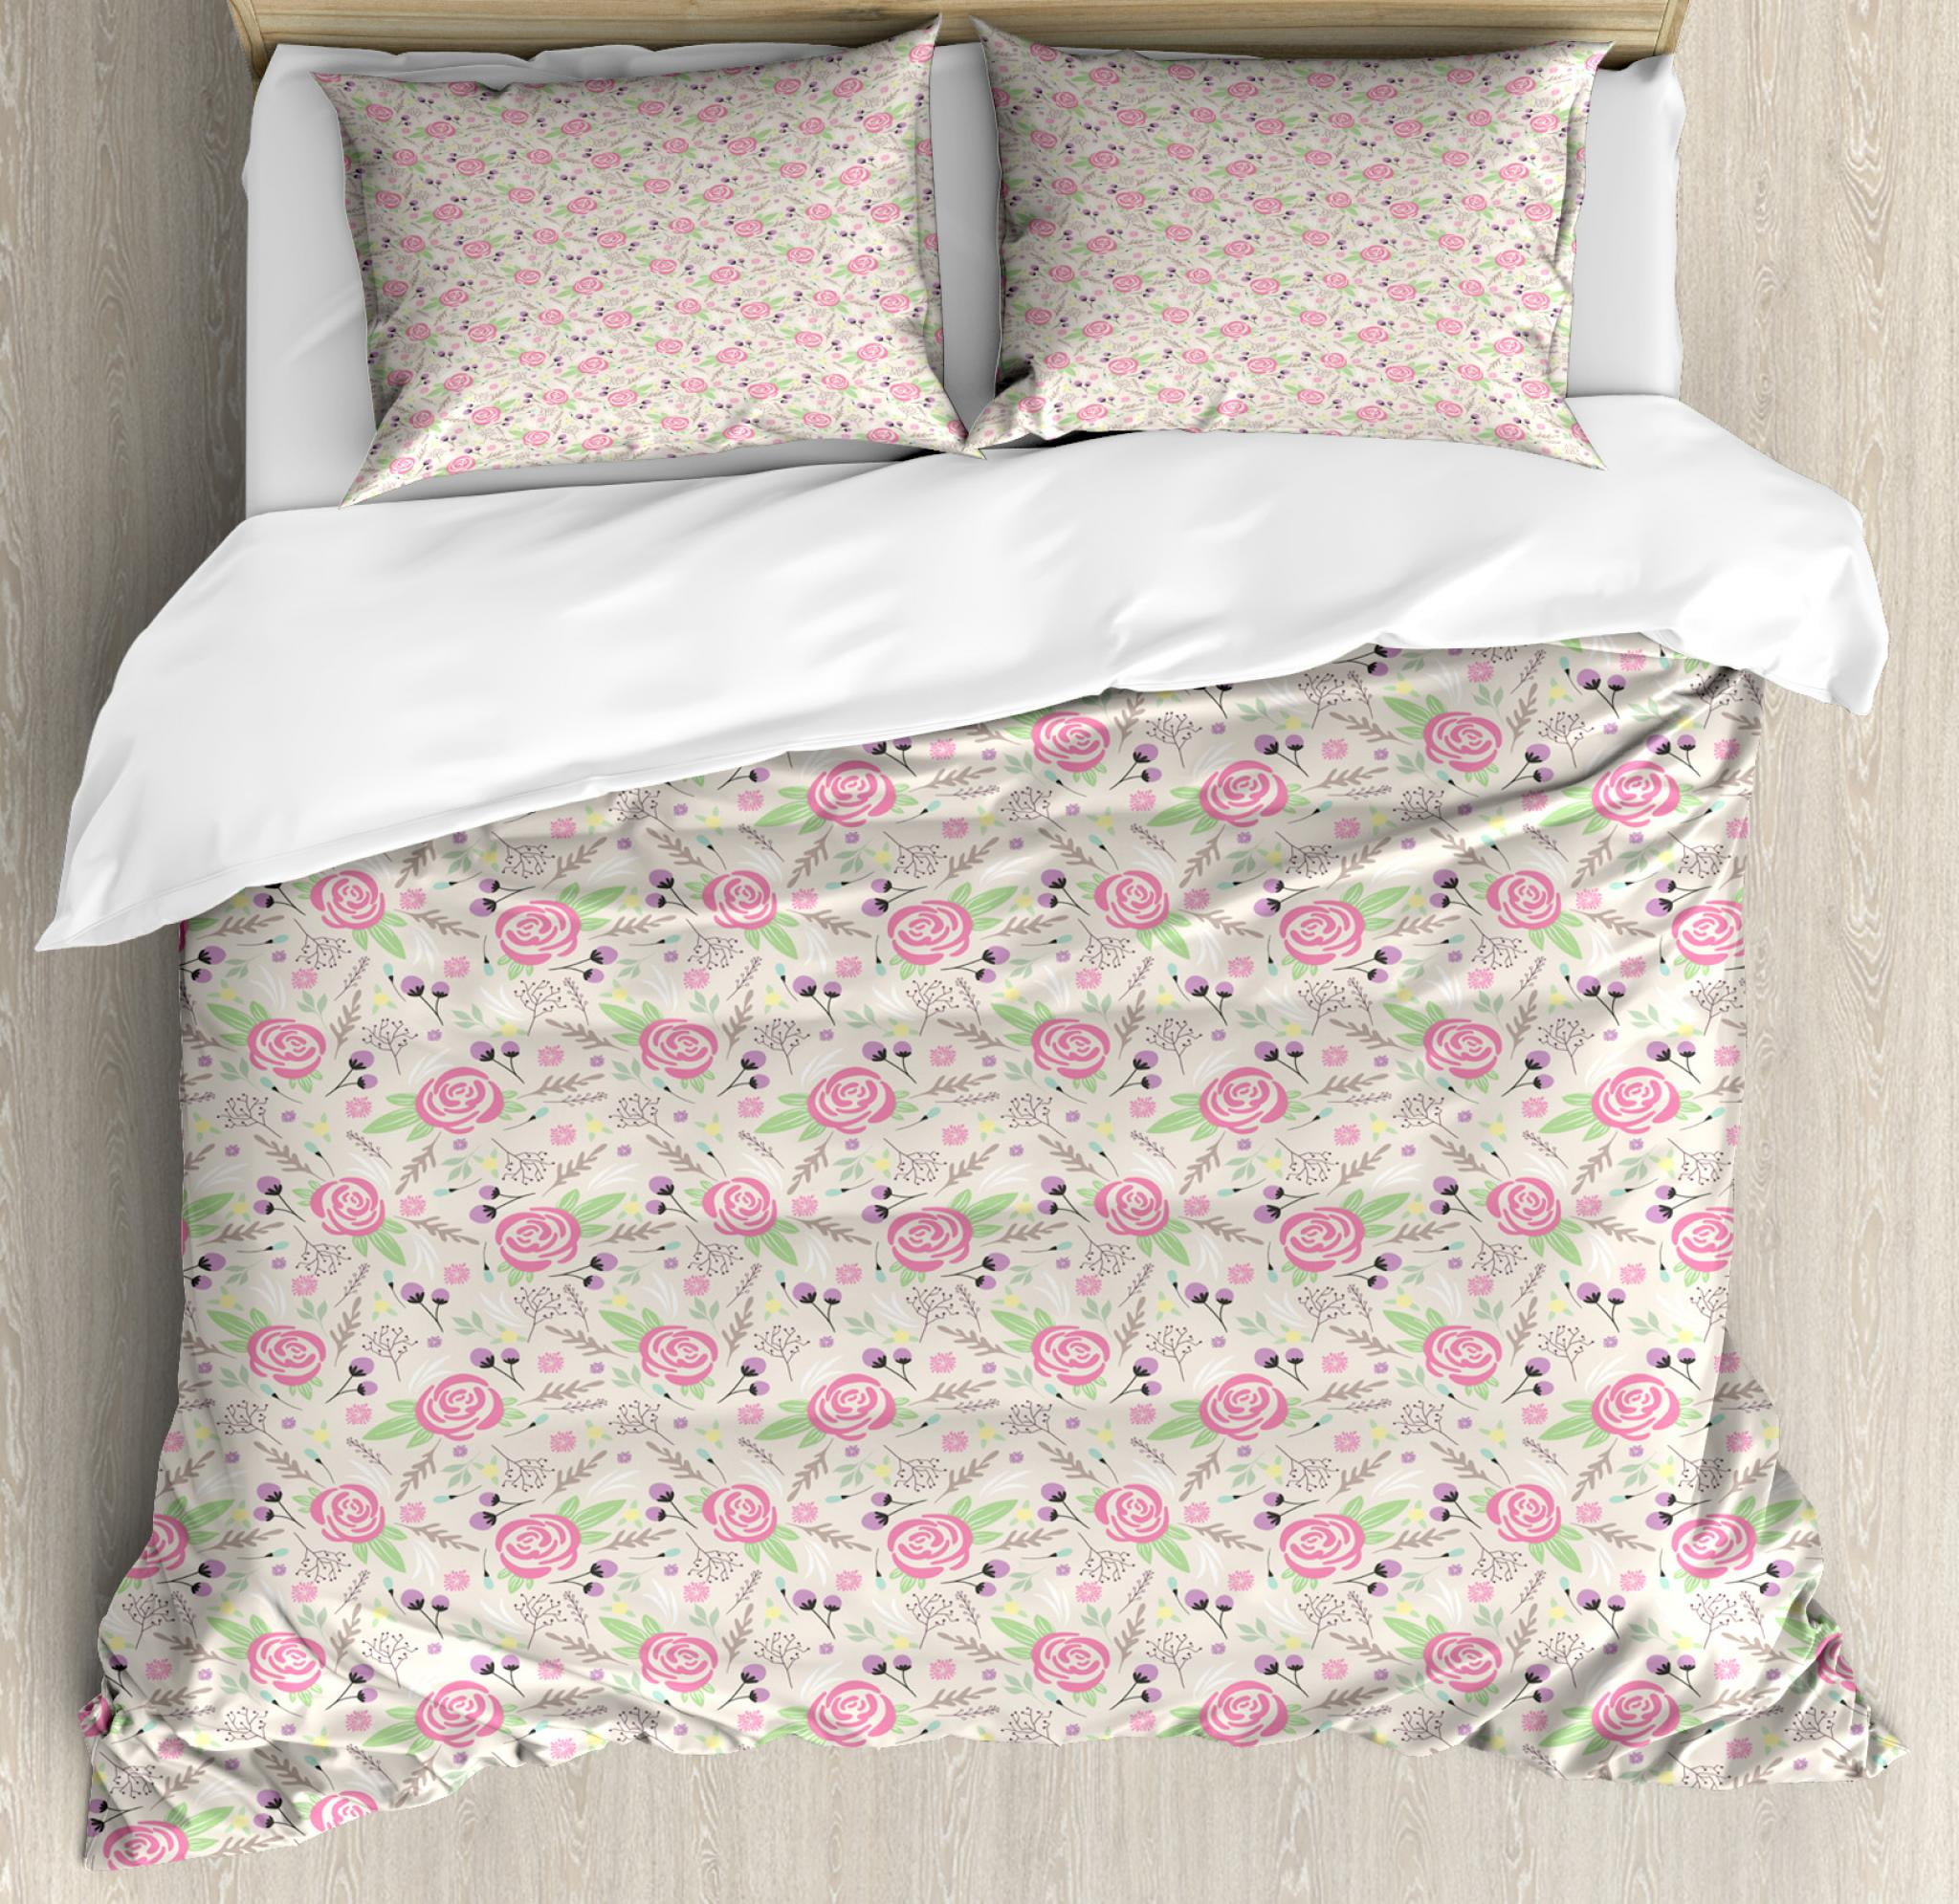 Floral King Size Duvet Cover Set Silhouette Petals And Buds Of